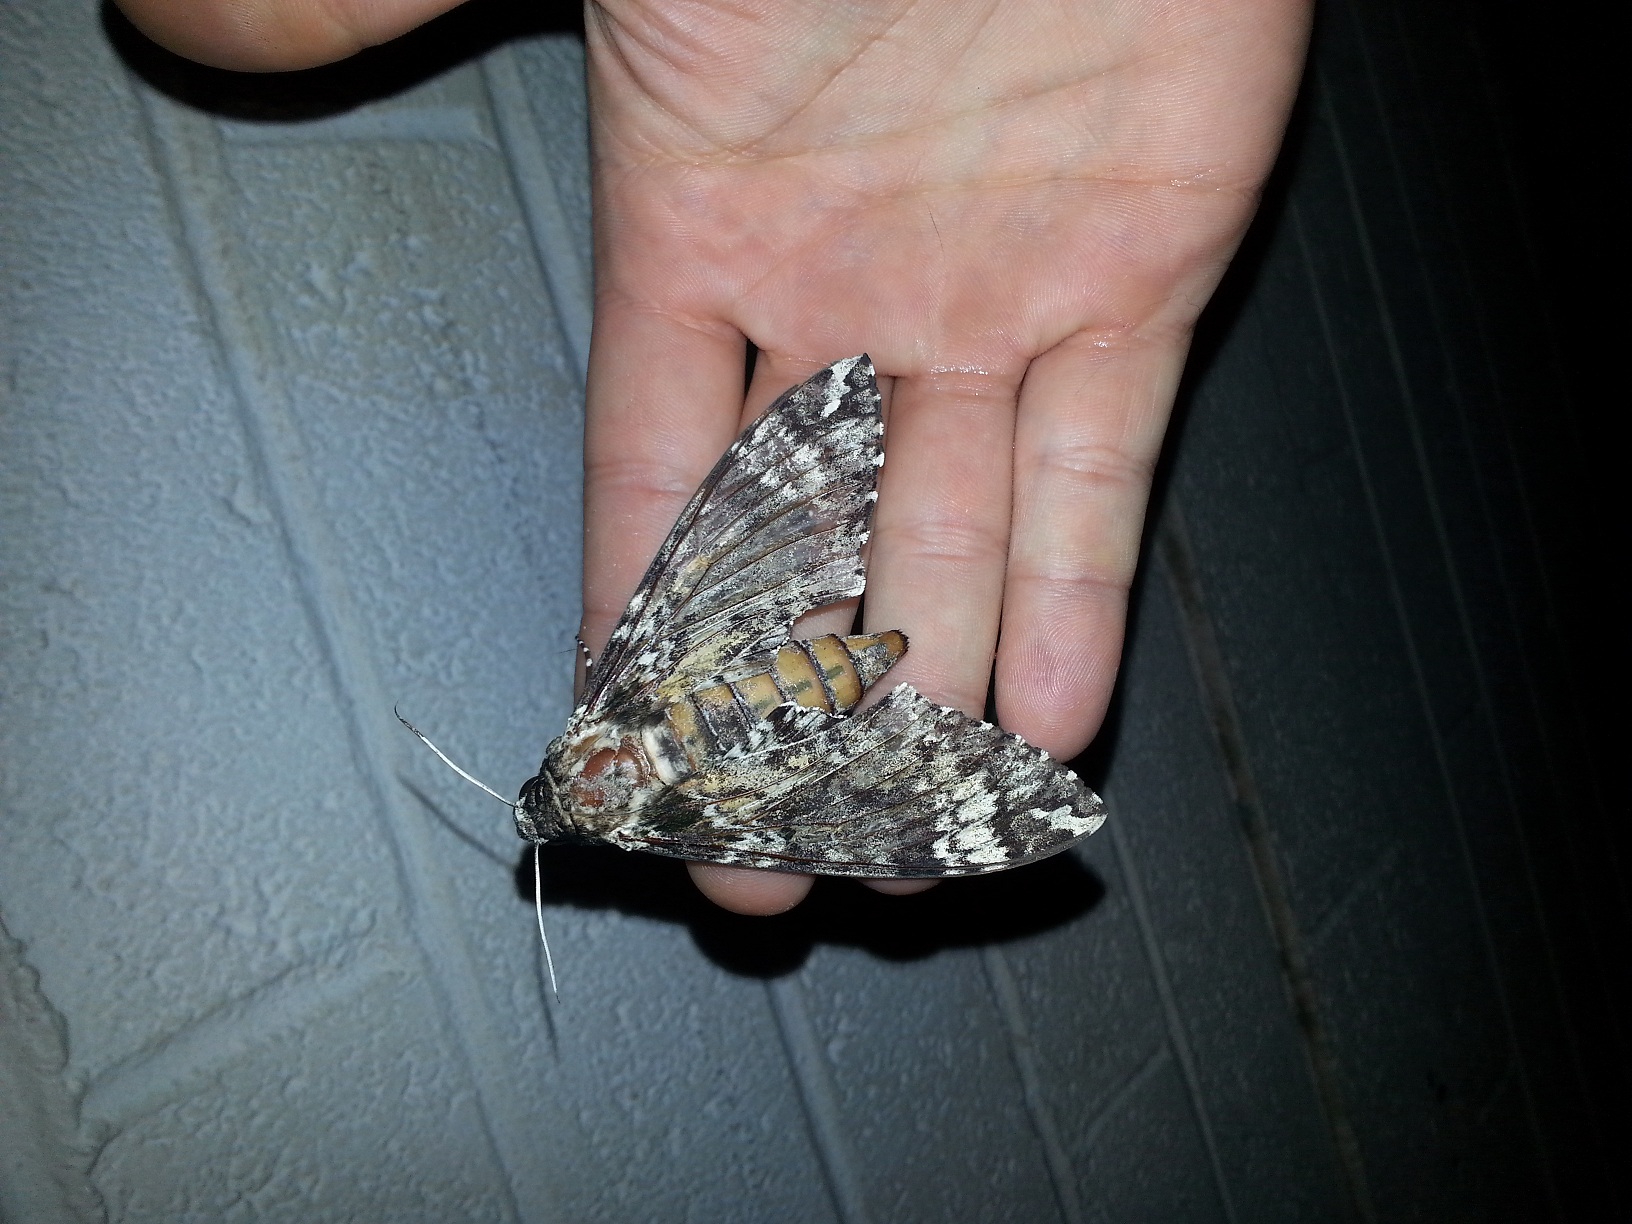 I caught this big ass moth at my mom's house last night. One of her cats was trying to eat it. Not the biggest one I've ever seen, but its still pretty big.